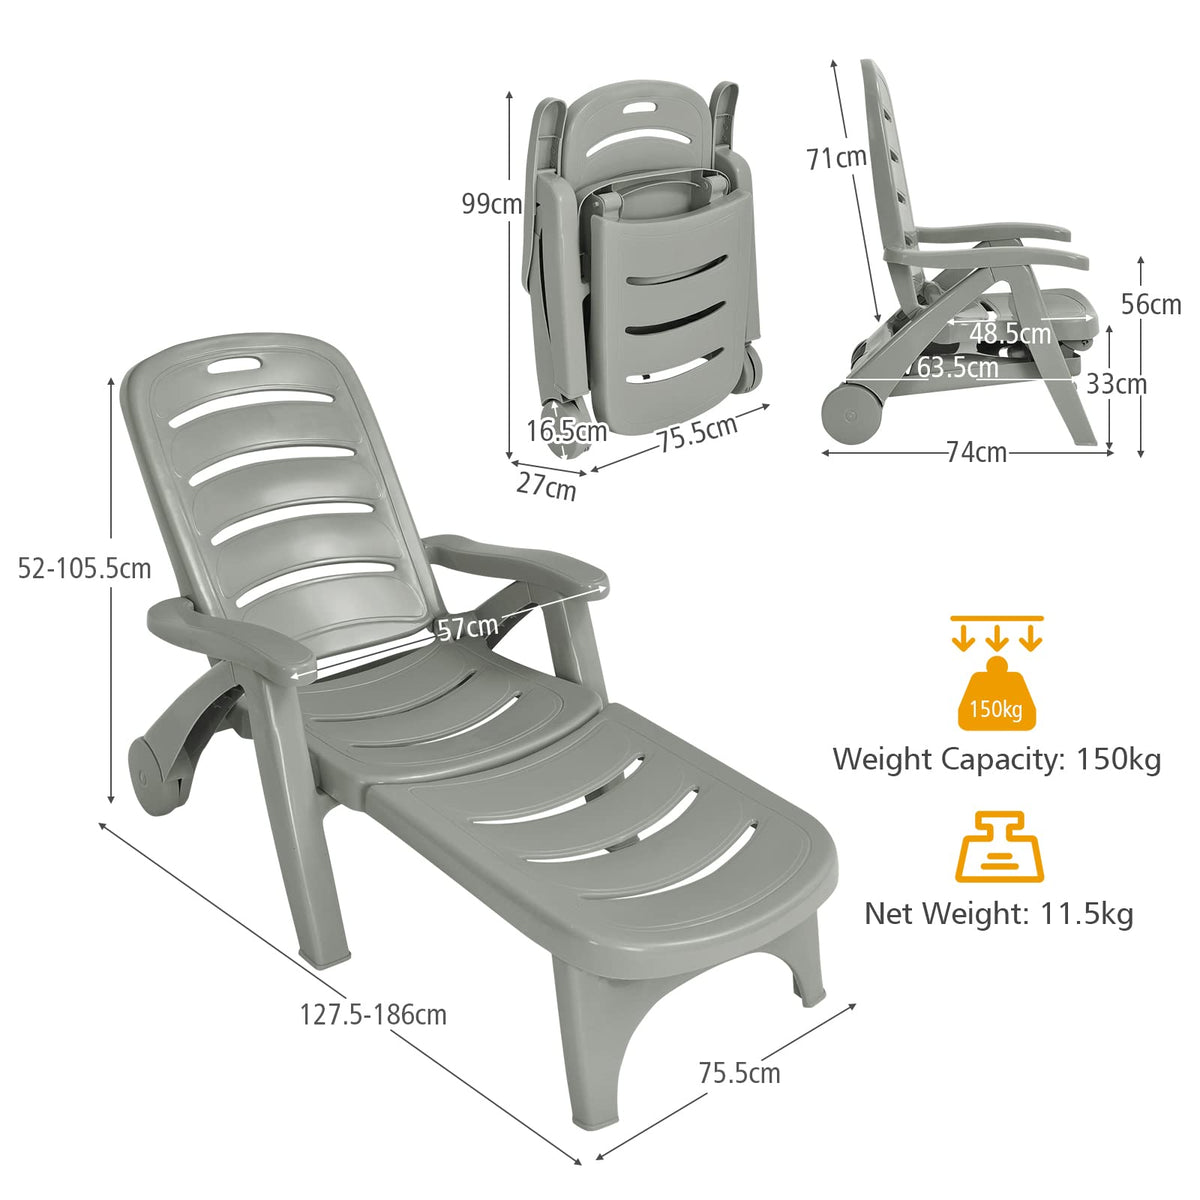 Folding Camping Lounge Chair, Portable Rolling Recliner w/Wheels, Gray